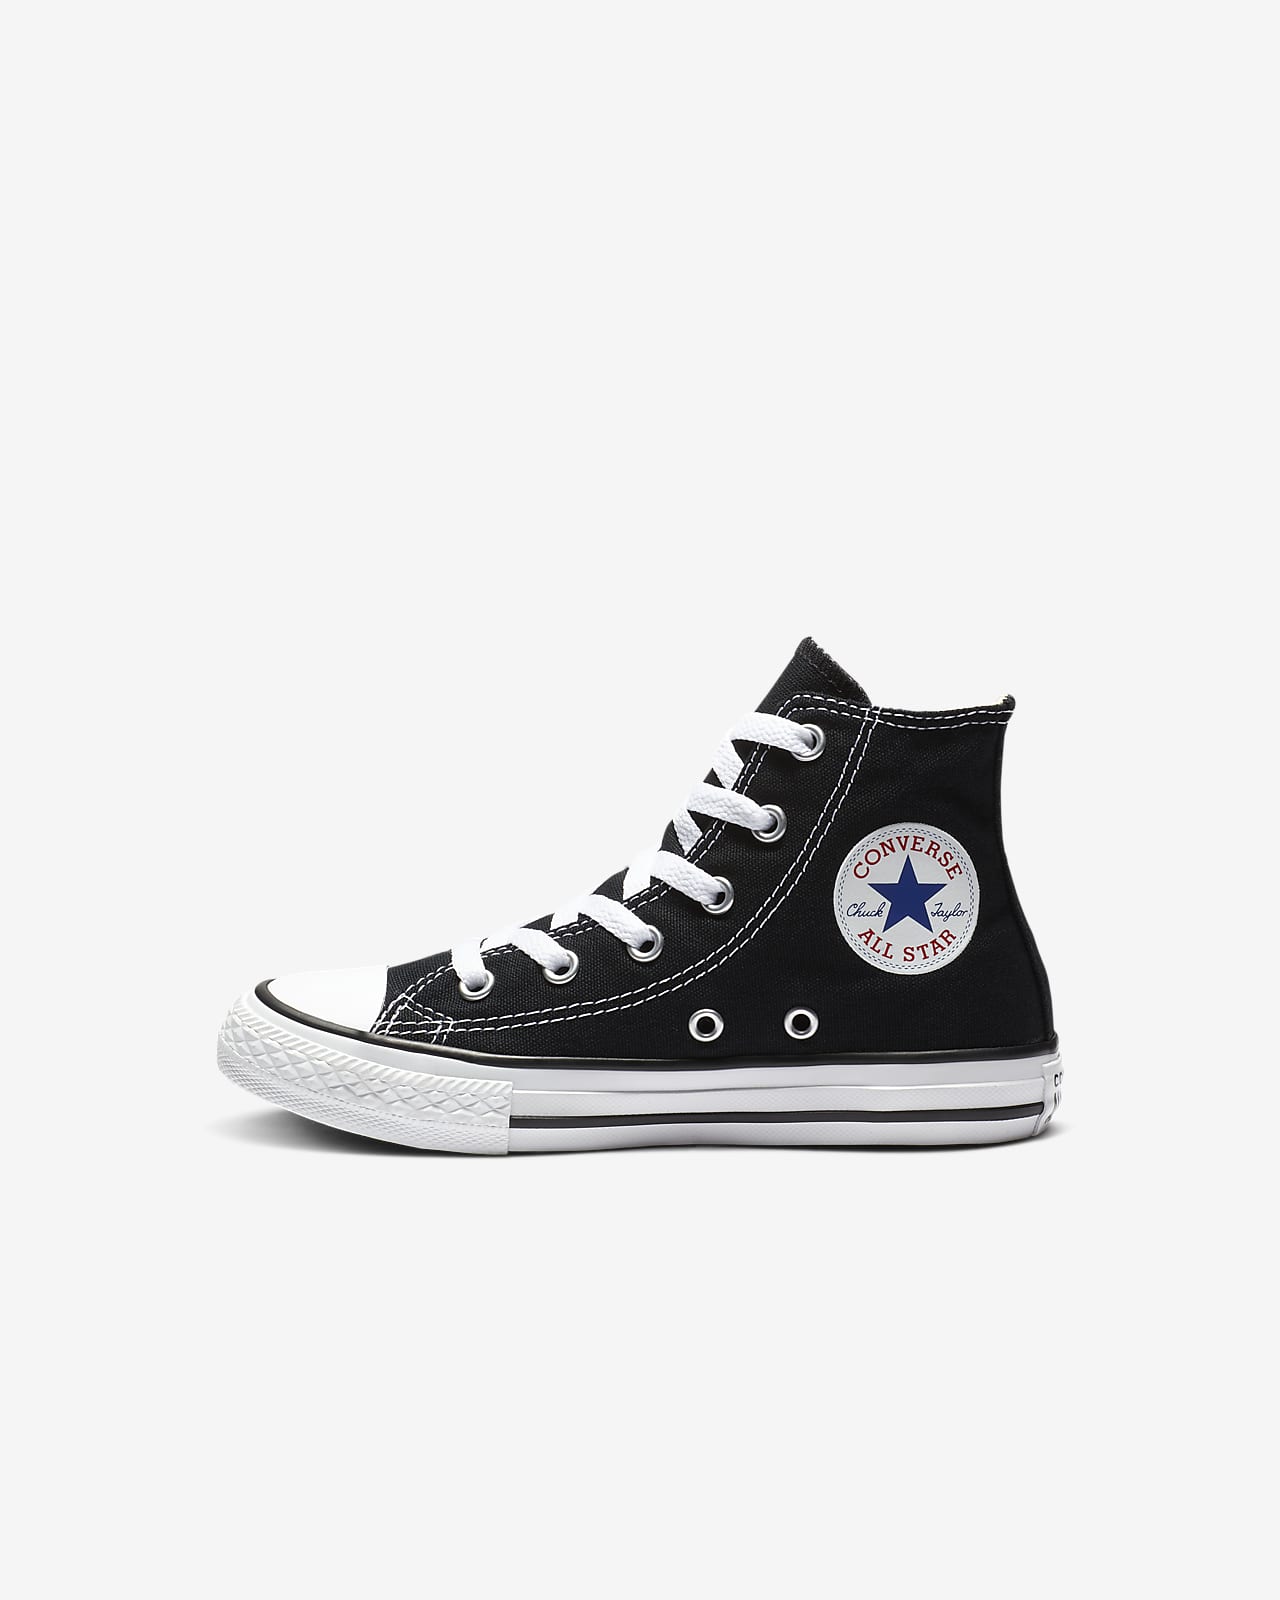 nike size to converse